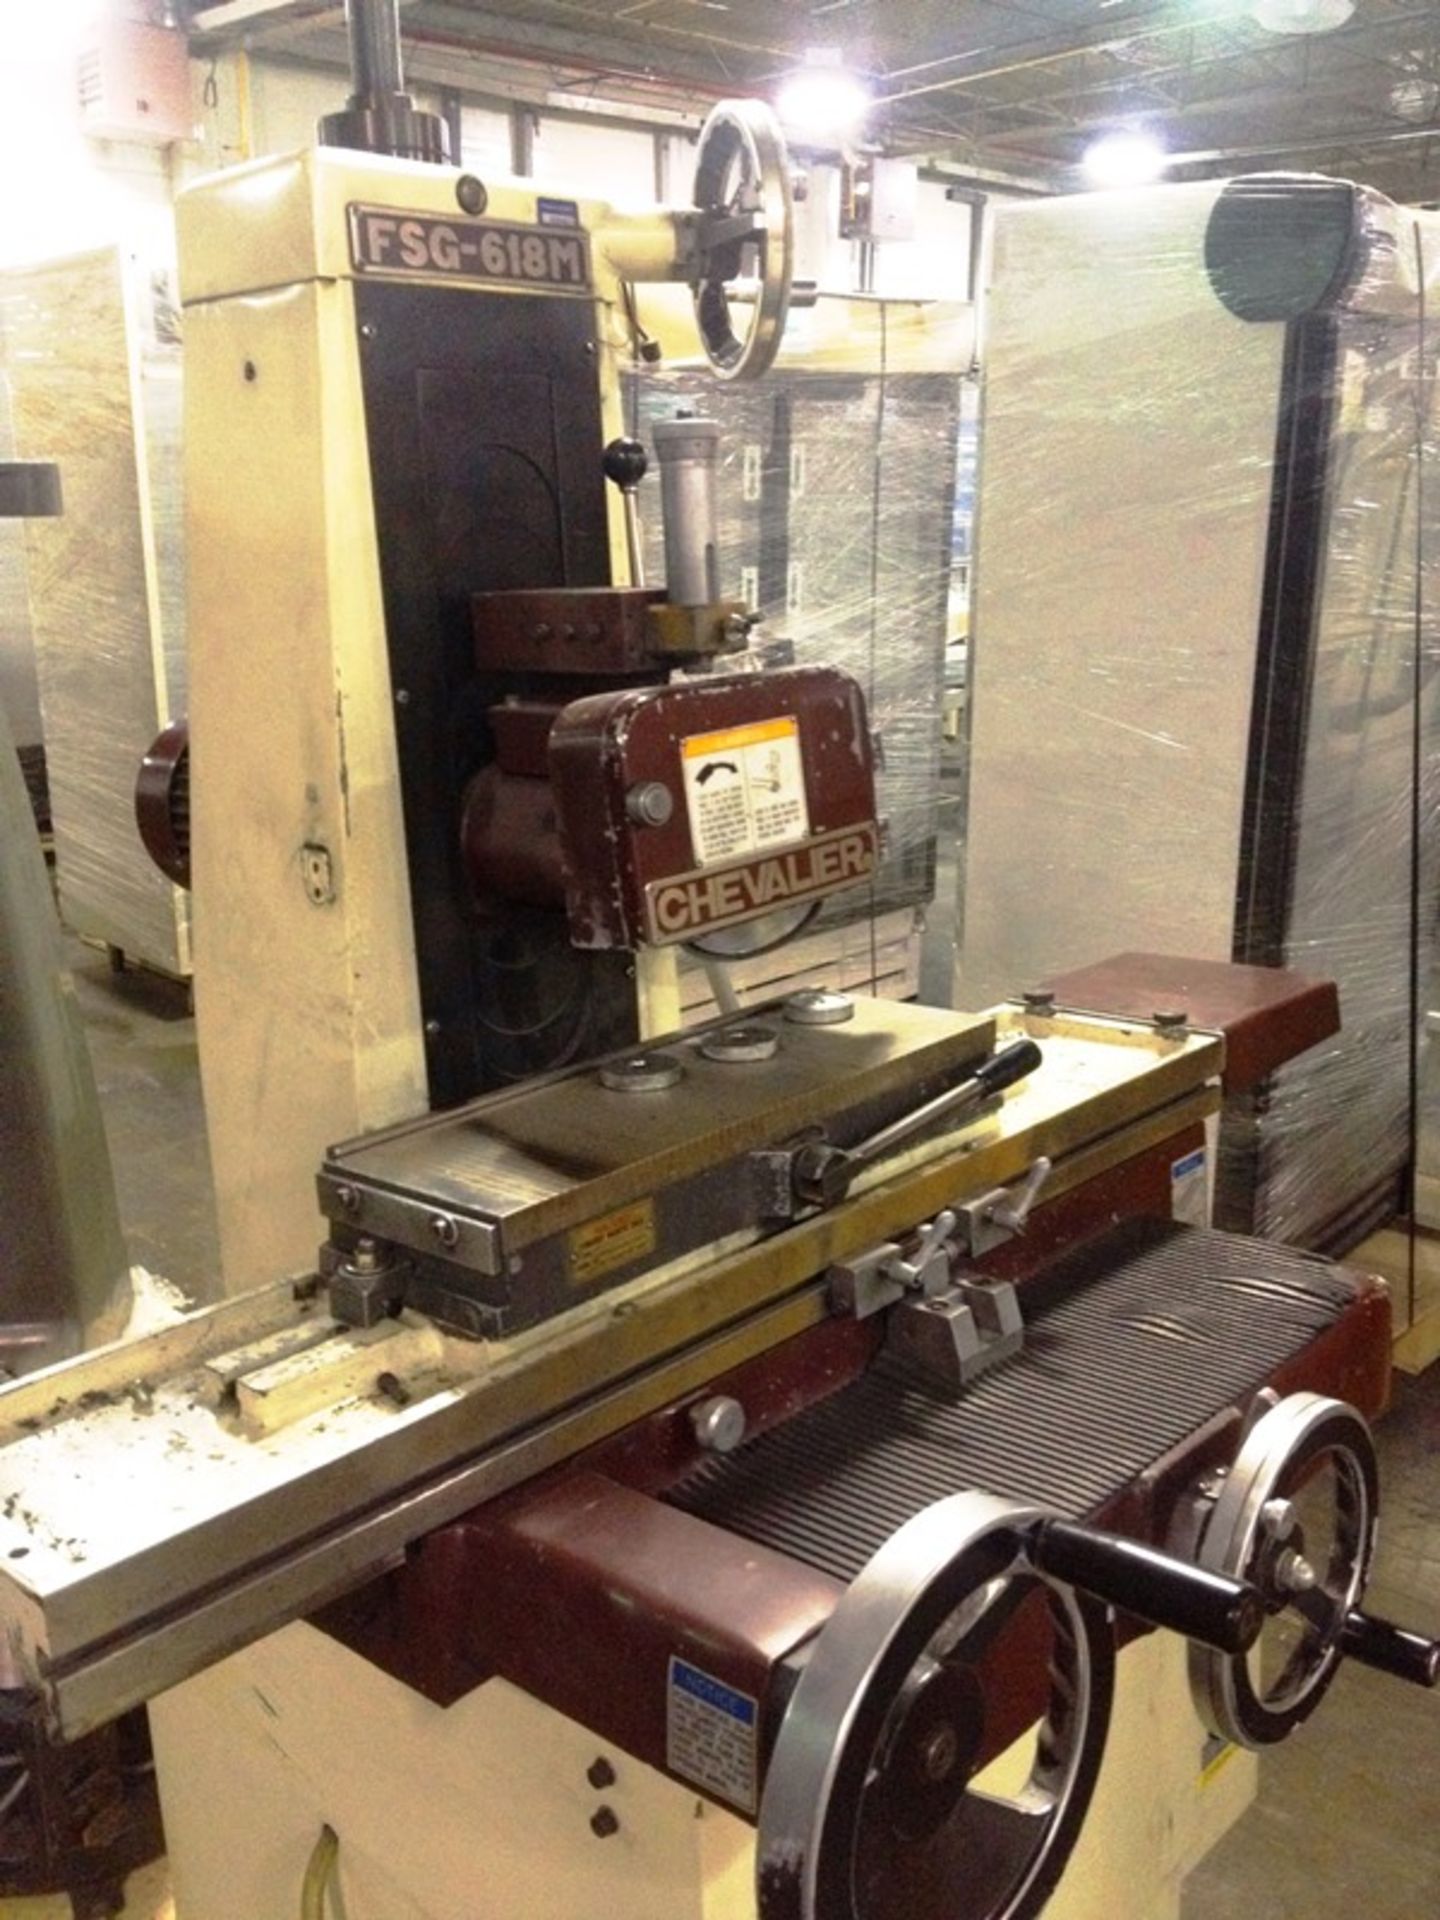 Surface Grinder, Brand: Chevalier, Model: FSG-6184, Series: A3841021. Condition: Good, Location: Cd. - Image 12 of 13